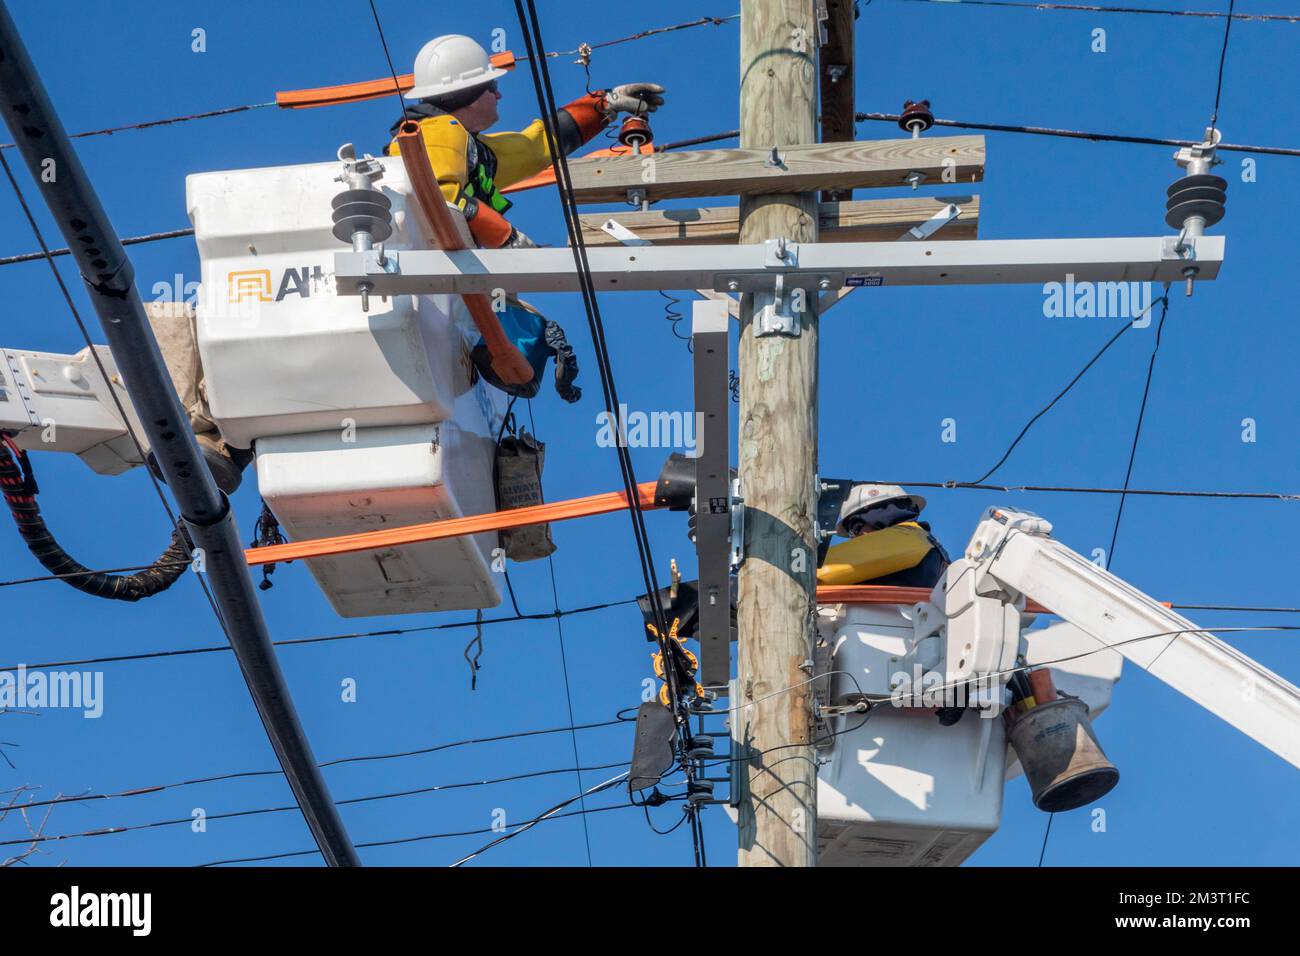 Detroit, Michigan - A crew works to upgrade electrical transmission lines. Stock Photo